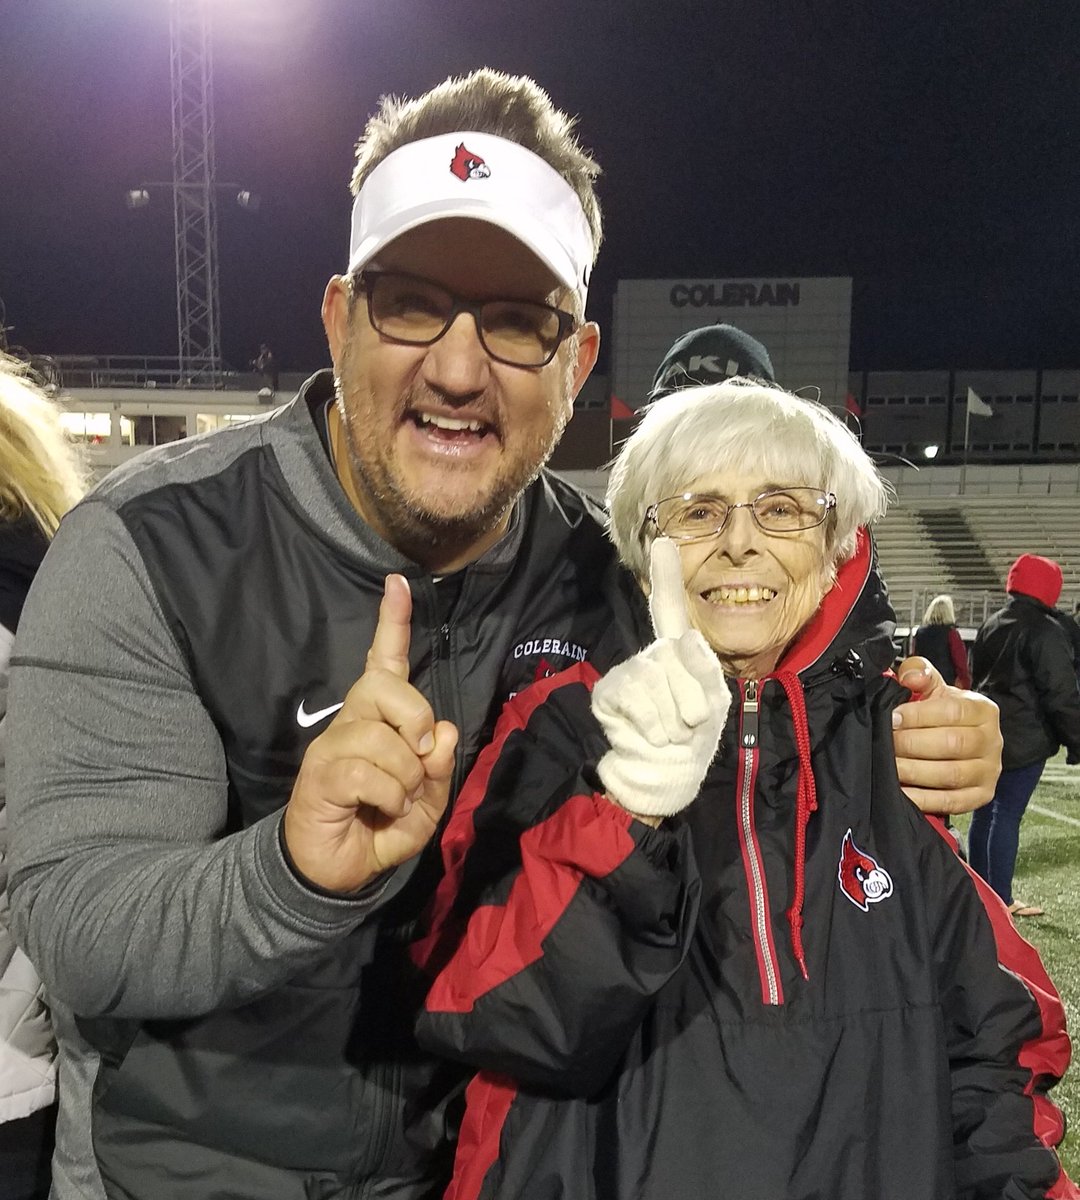 Tonight our Cards hit the gridiron with a mighty force watching over from above. Give it ALL you've got in honor of the way she lived her life. #honorauntcathy #noholdingback #nofear #havefaith #believeineachother #colerainproud @ColerainFtball @WeAreColerain